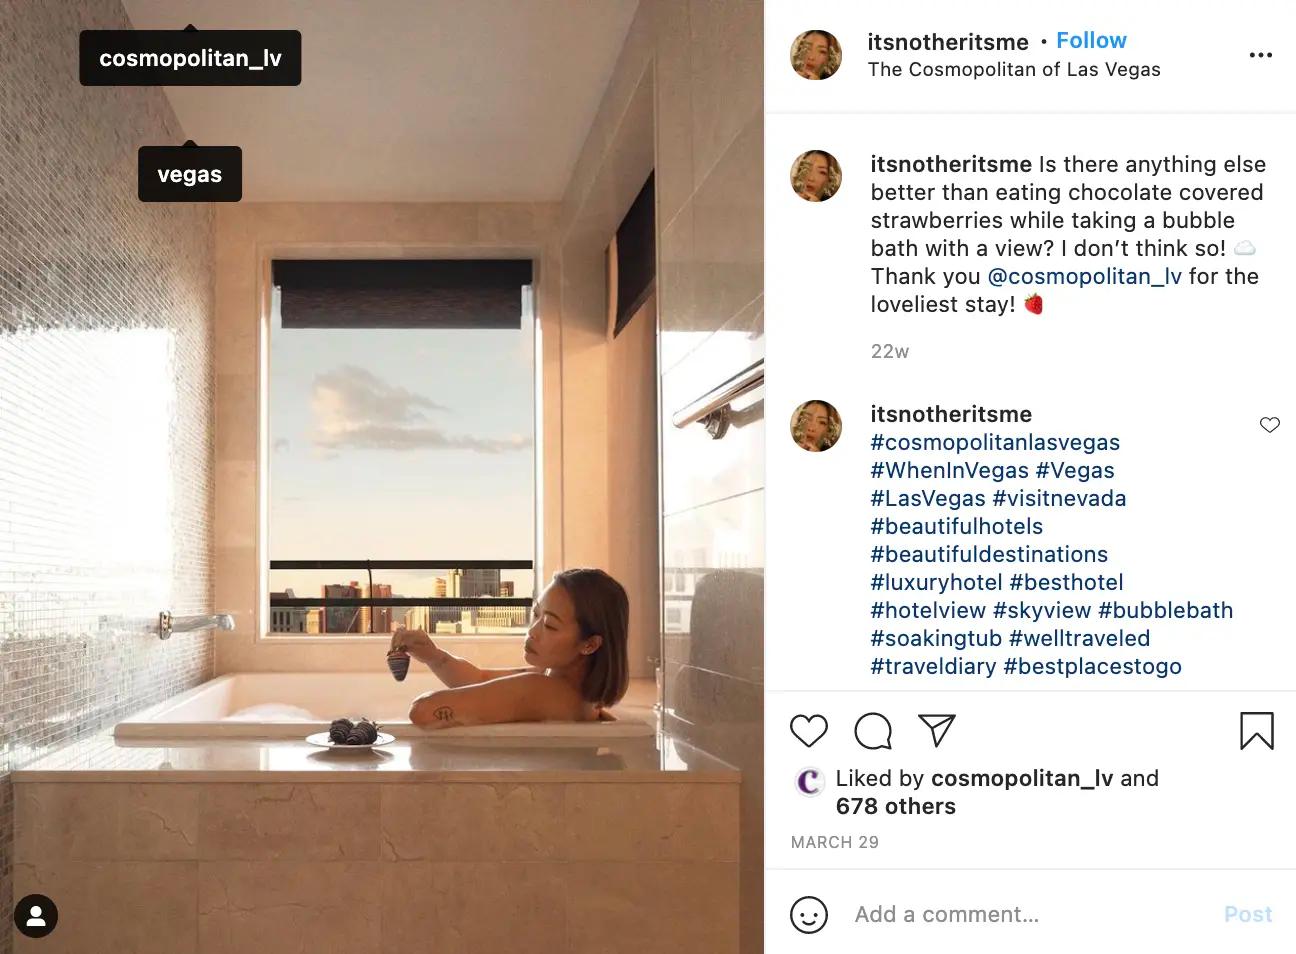 Instagram post from micro-influencer eating chocolate-covered strawberries at the Cosmopolitan of Las Vegas in the bathtub